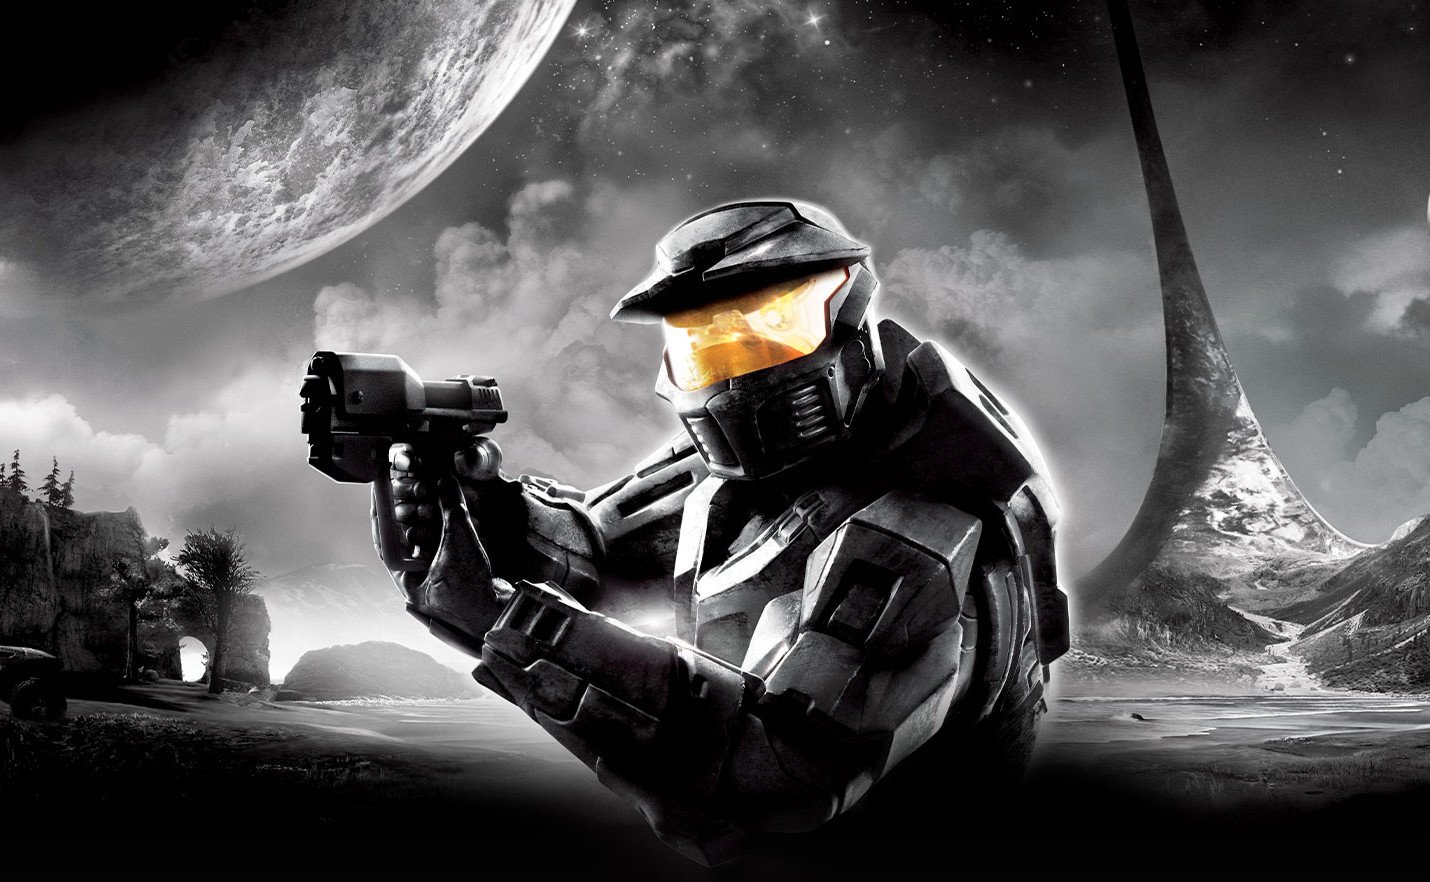 Halo: Combat Evolved Anniversary Review